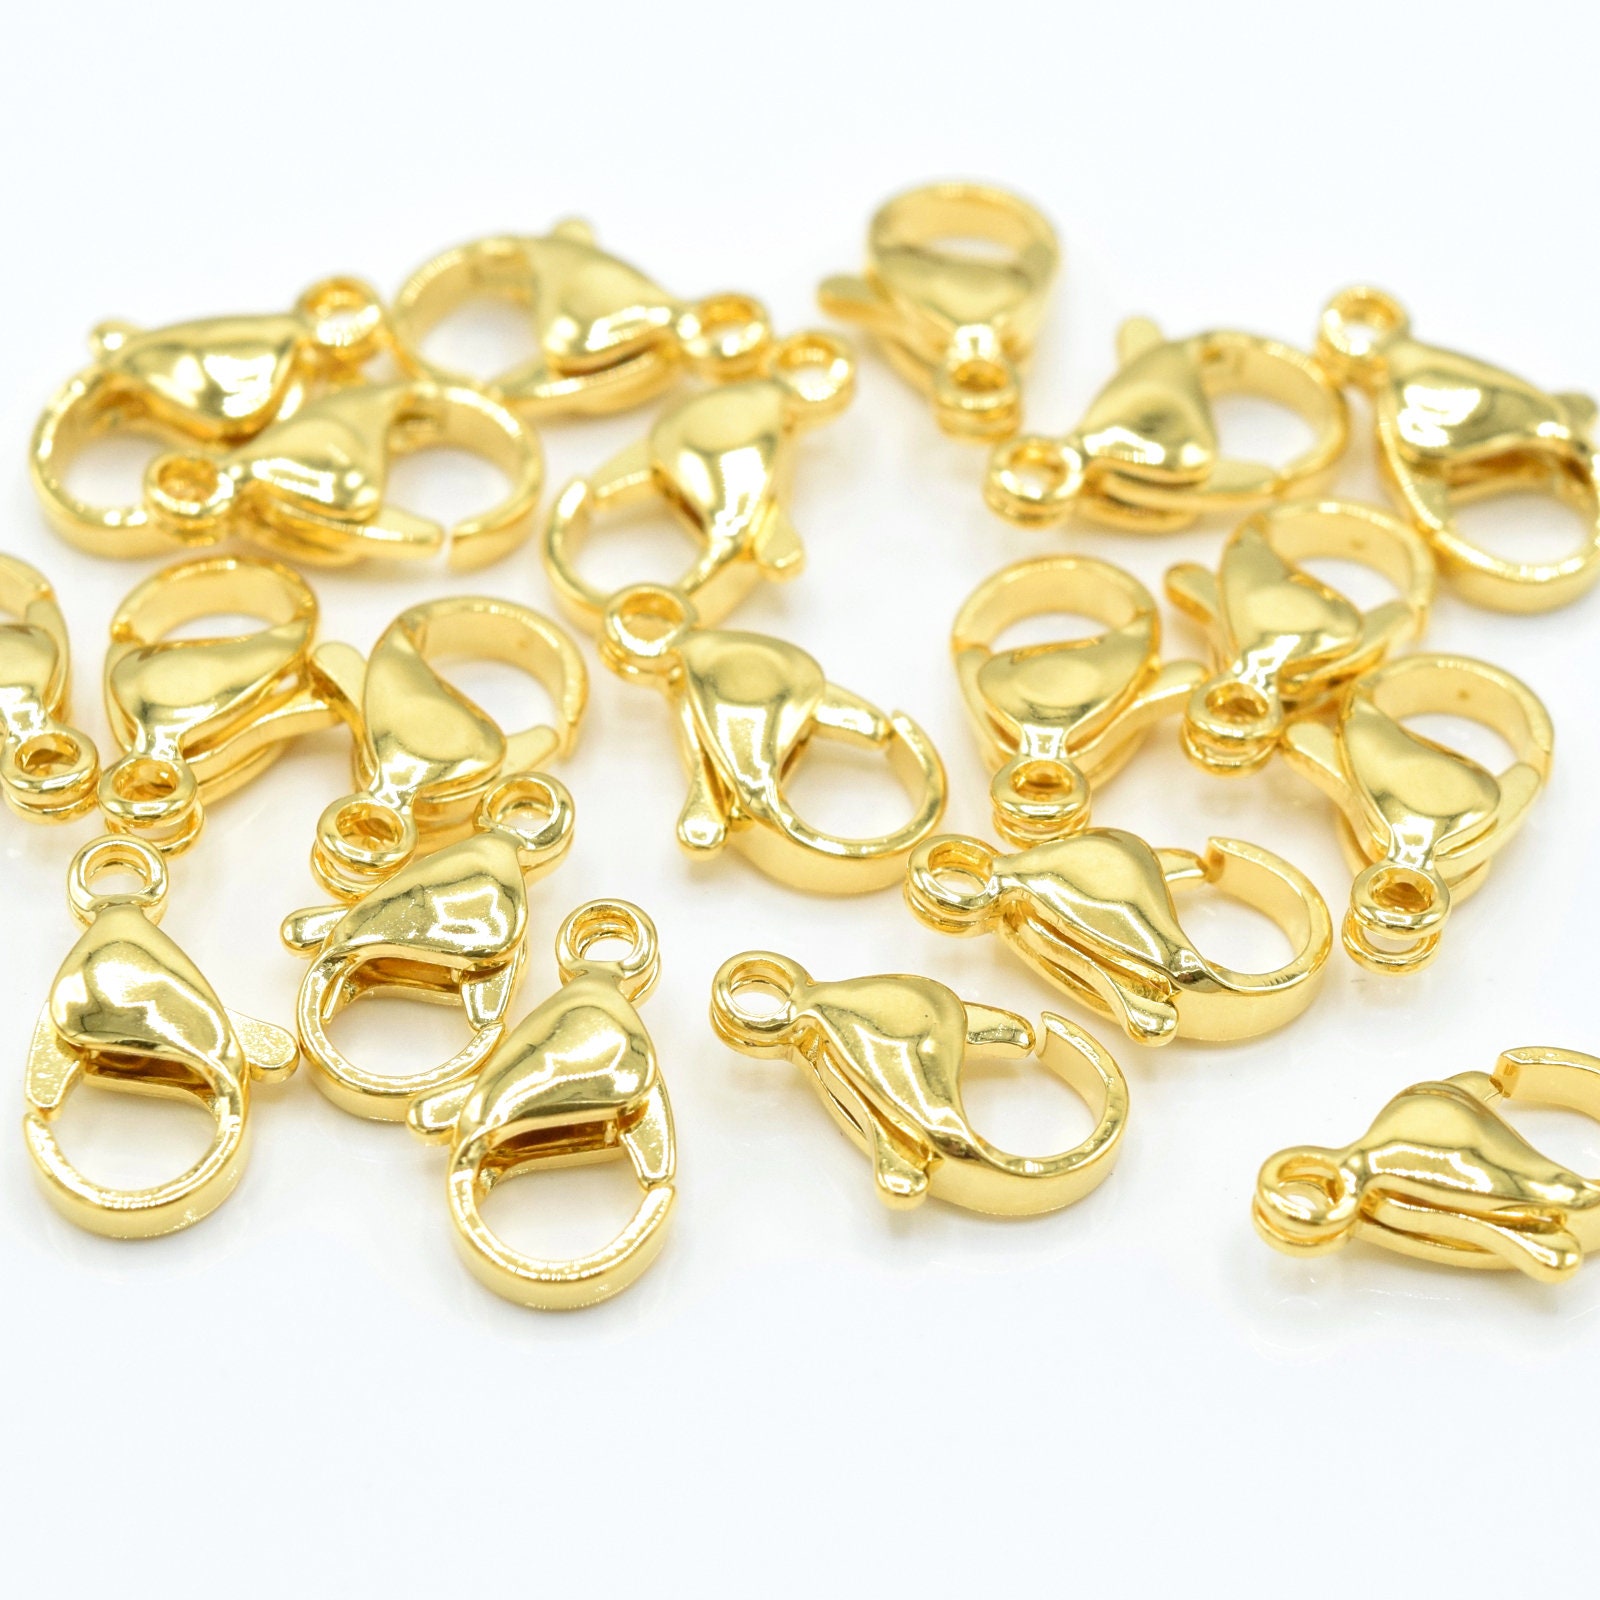 4pcs 3/4inch1inch1.25inch1.5inch Gold Lobster Claw Clasp 